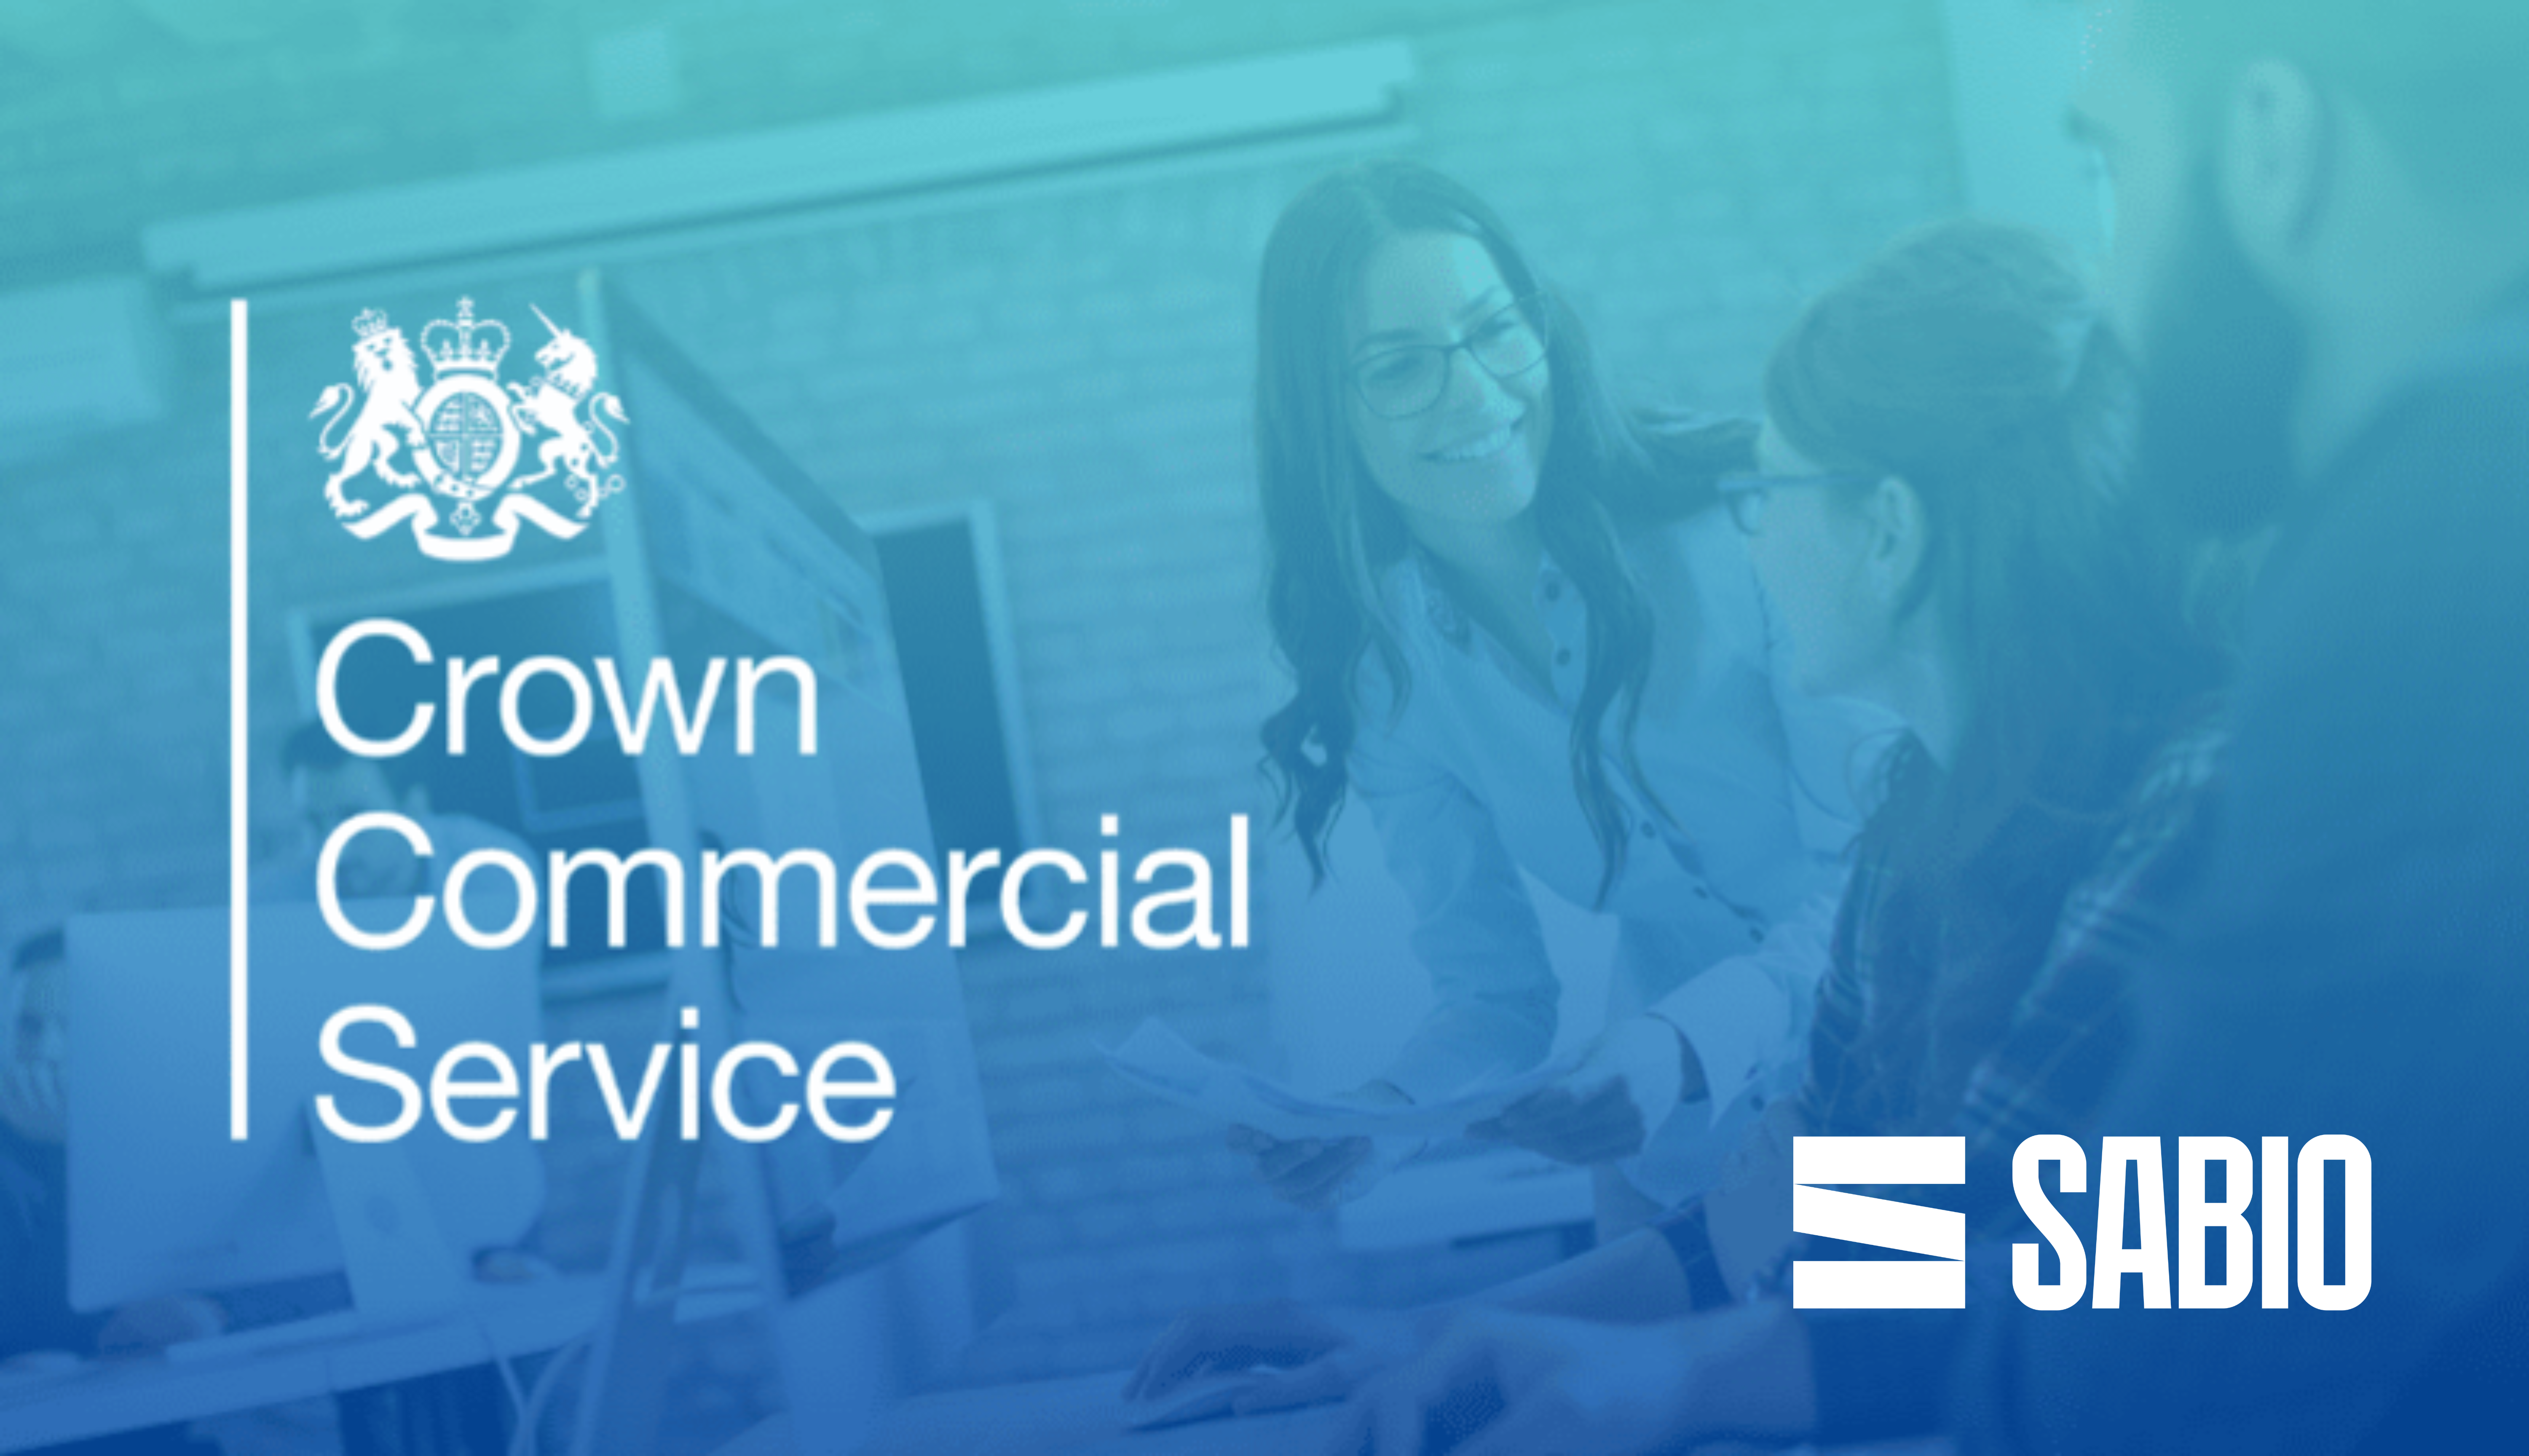 Sabio Group Named as Supplier on Crown Commercial Service’s Network Services 3 Framework